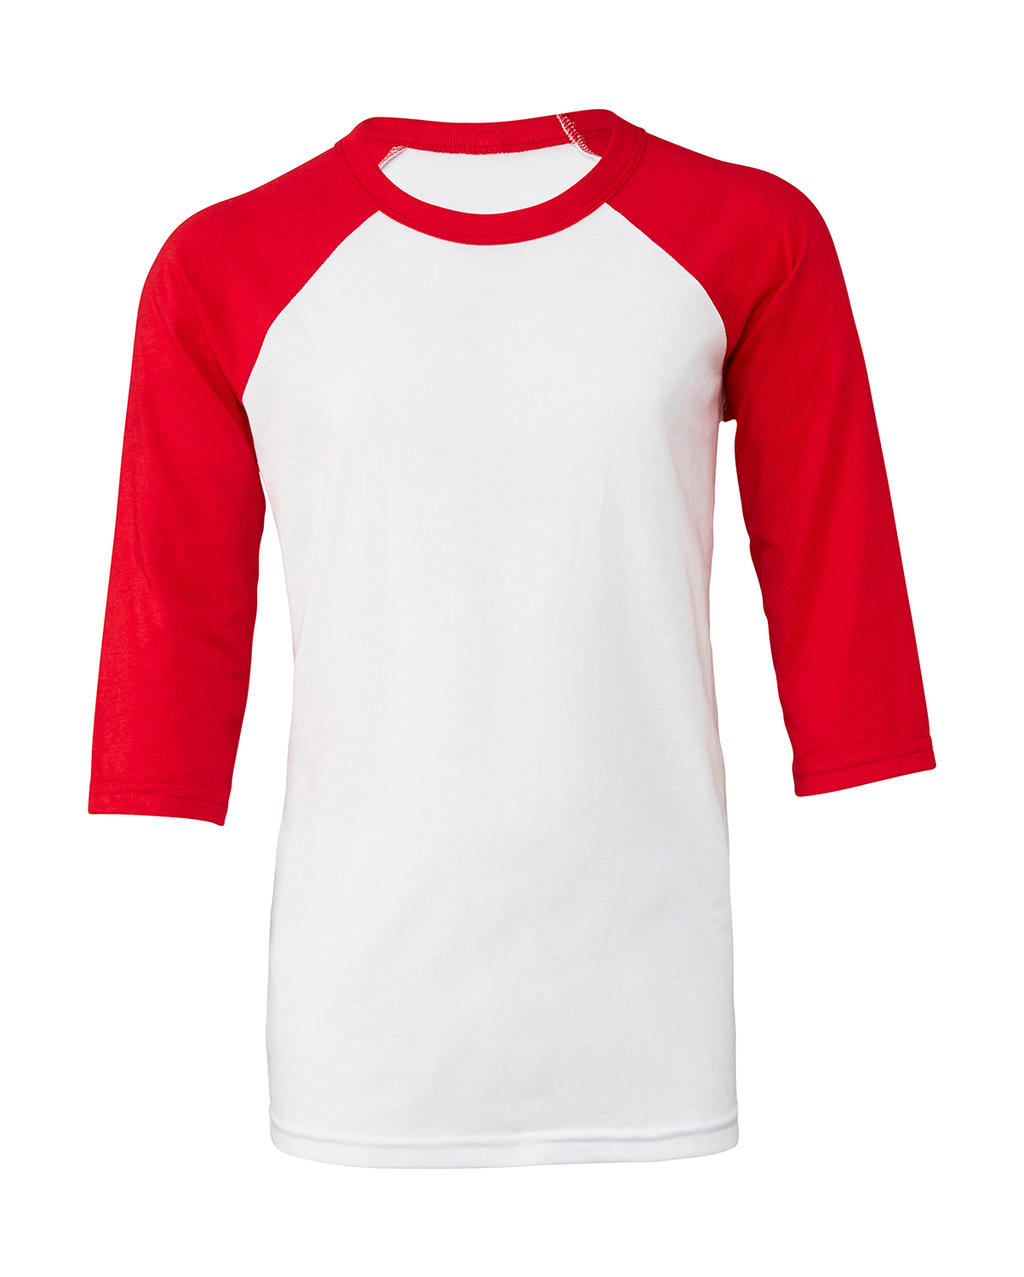  Youth 3/4 Sleeve Baseball Tee in Farbe White/Red